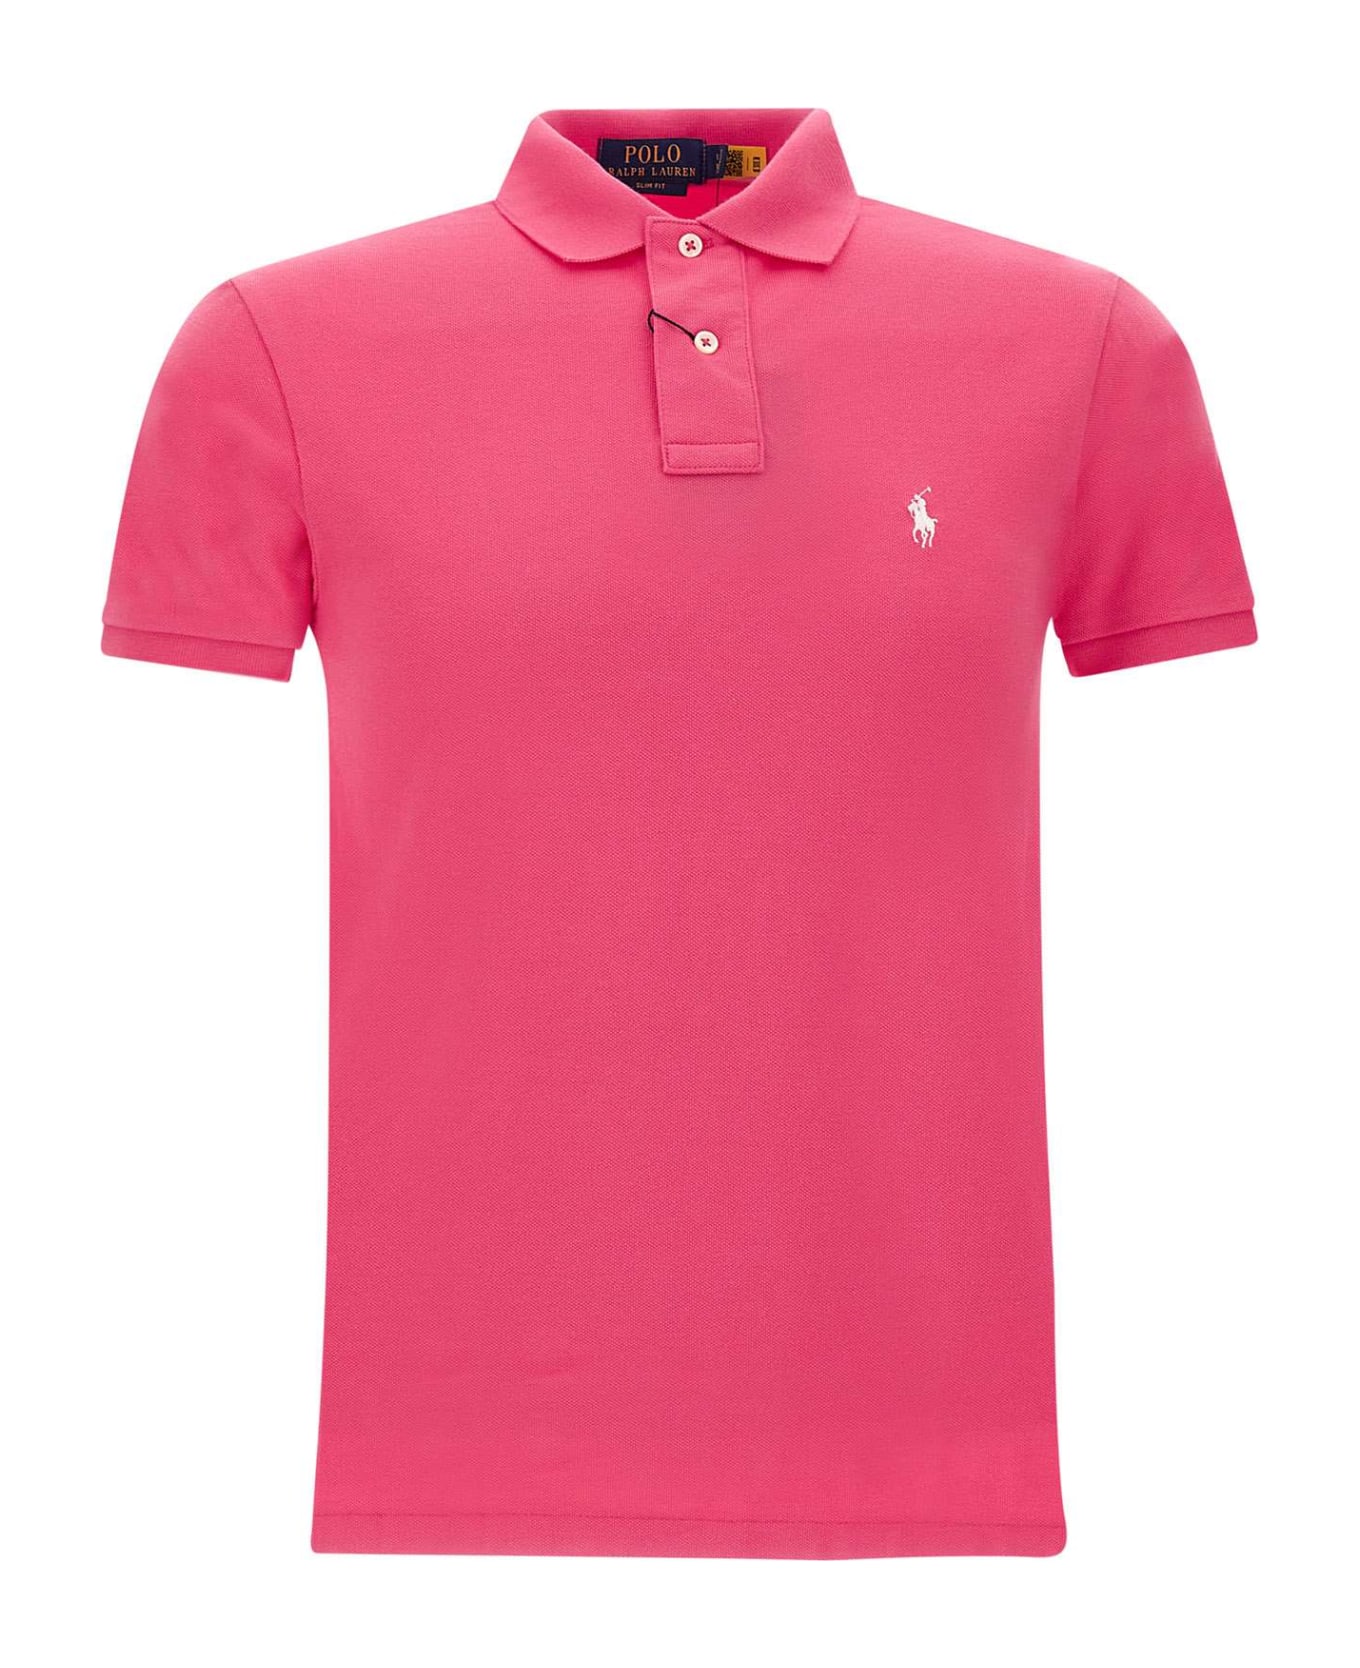 Polo Ralph Lauren Fuchsia And White Slim-fit Pique Polo Shirt - Pink ポロシャツ